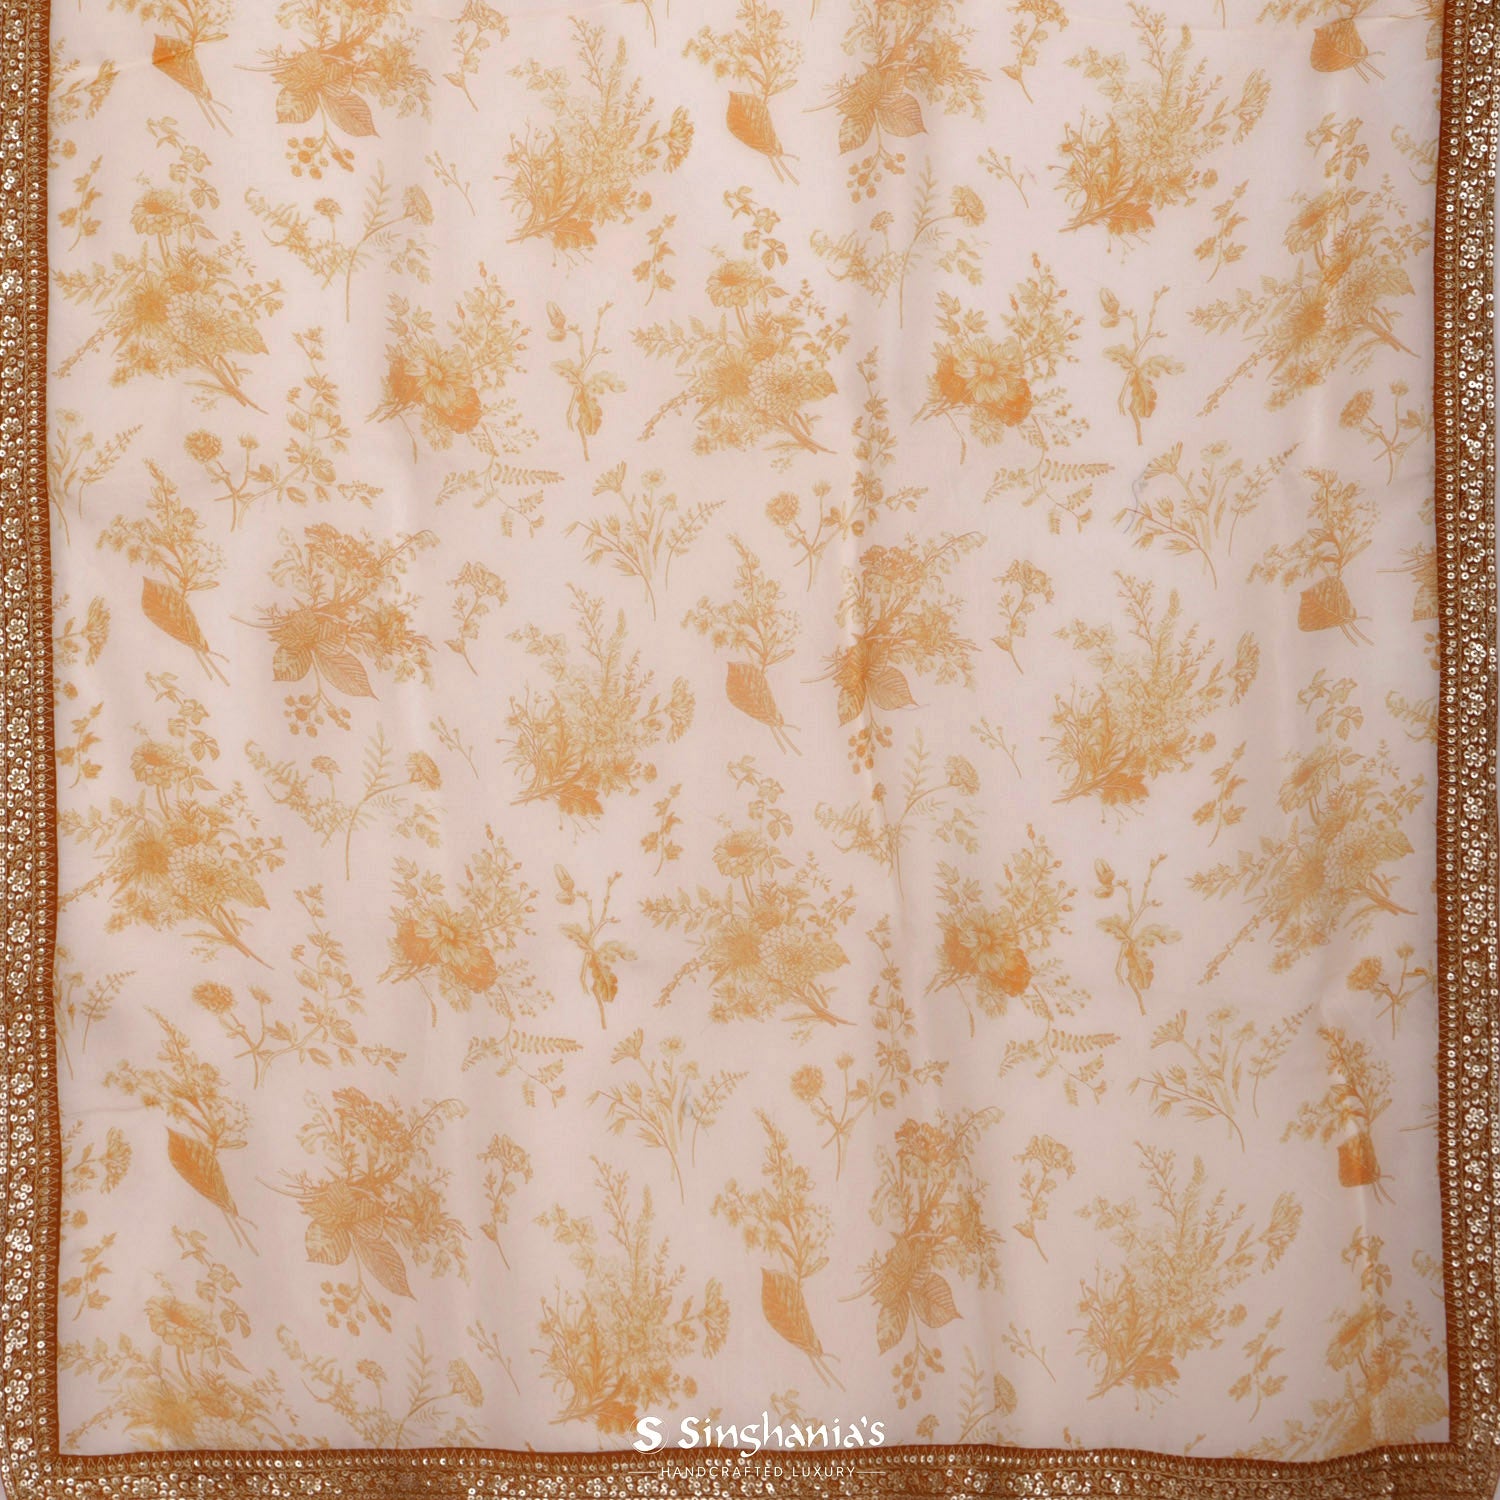 Antique White Printed Organza Saree With Floral Pattern